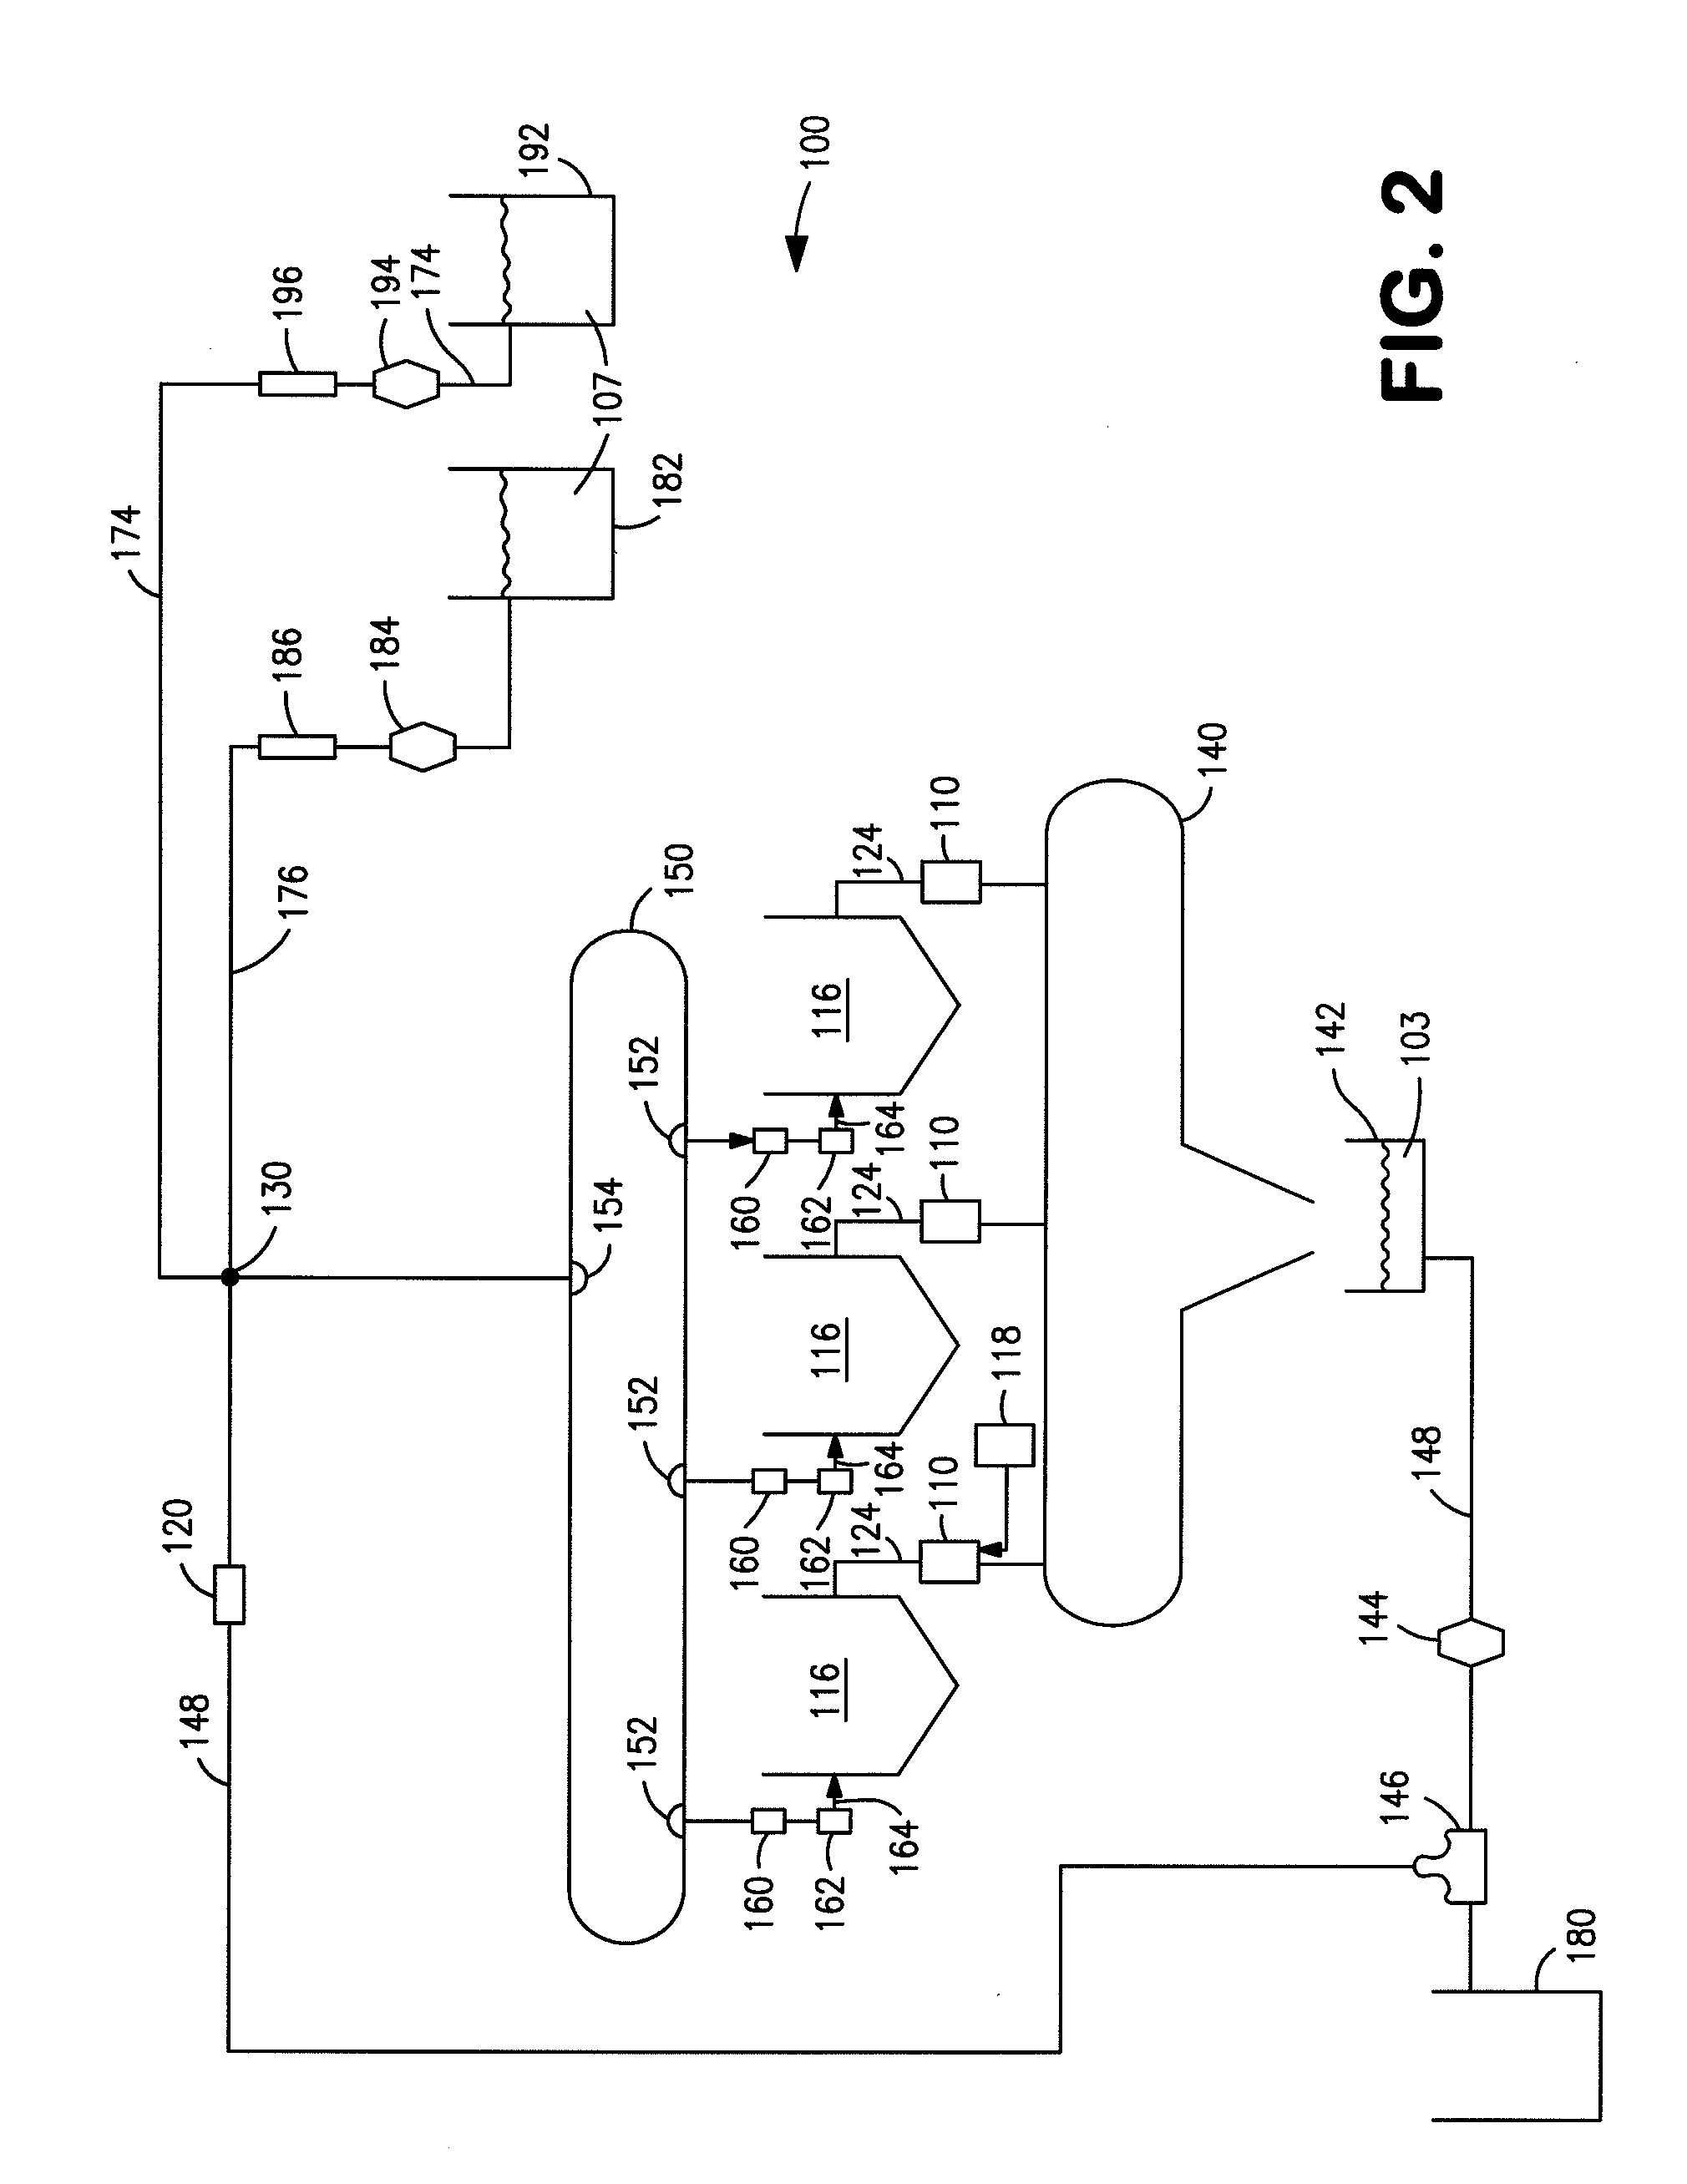 Cooking medium systems having a single fill manifold, and methods of supplying a cooking medium using such systems